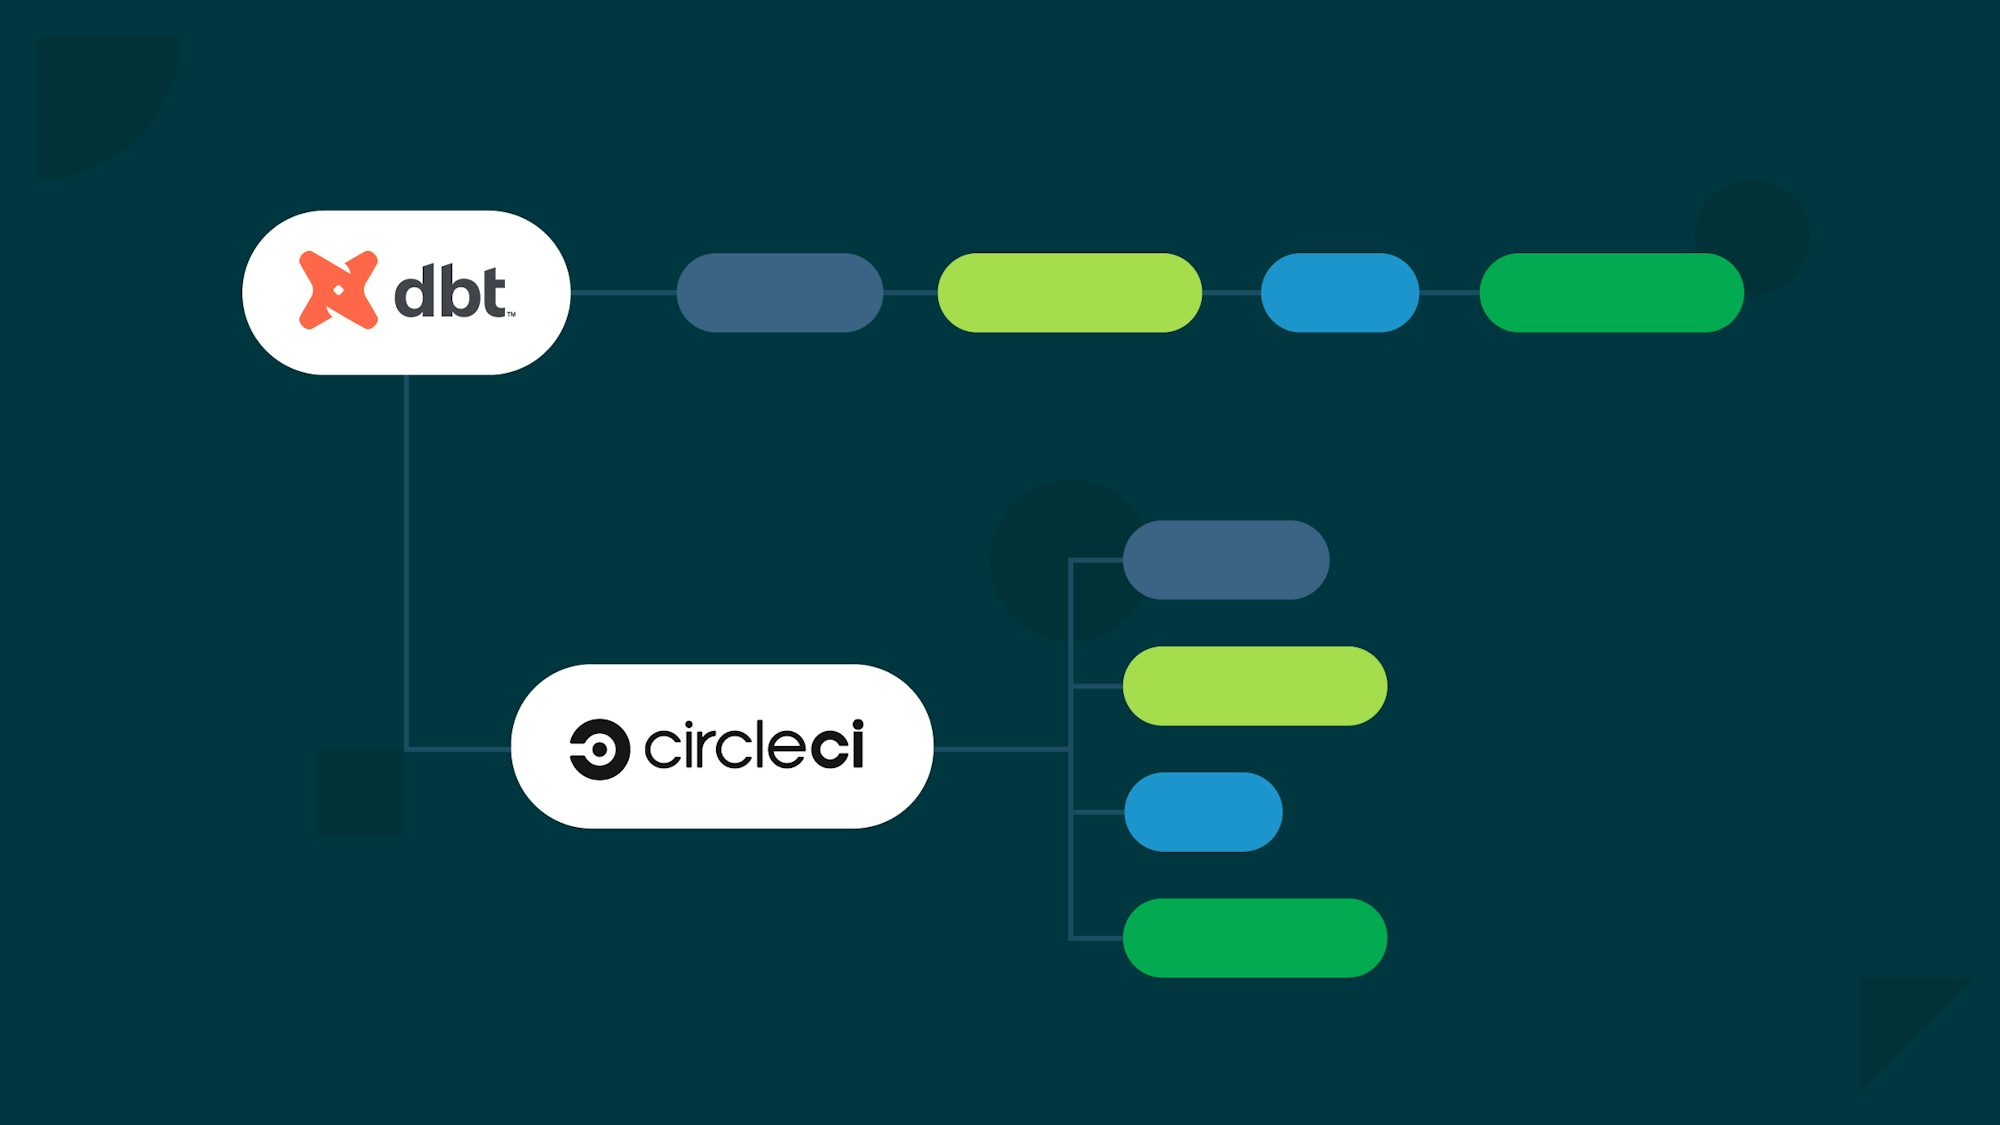 Stylized data elements show dbt and CircleCI working together.